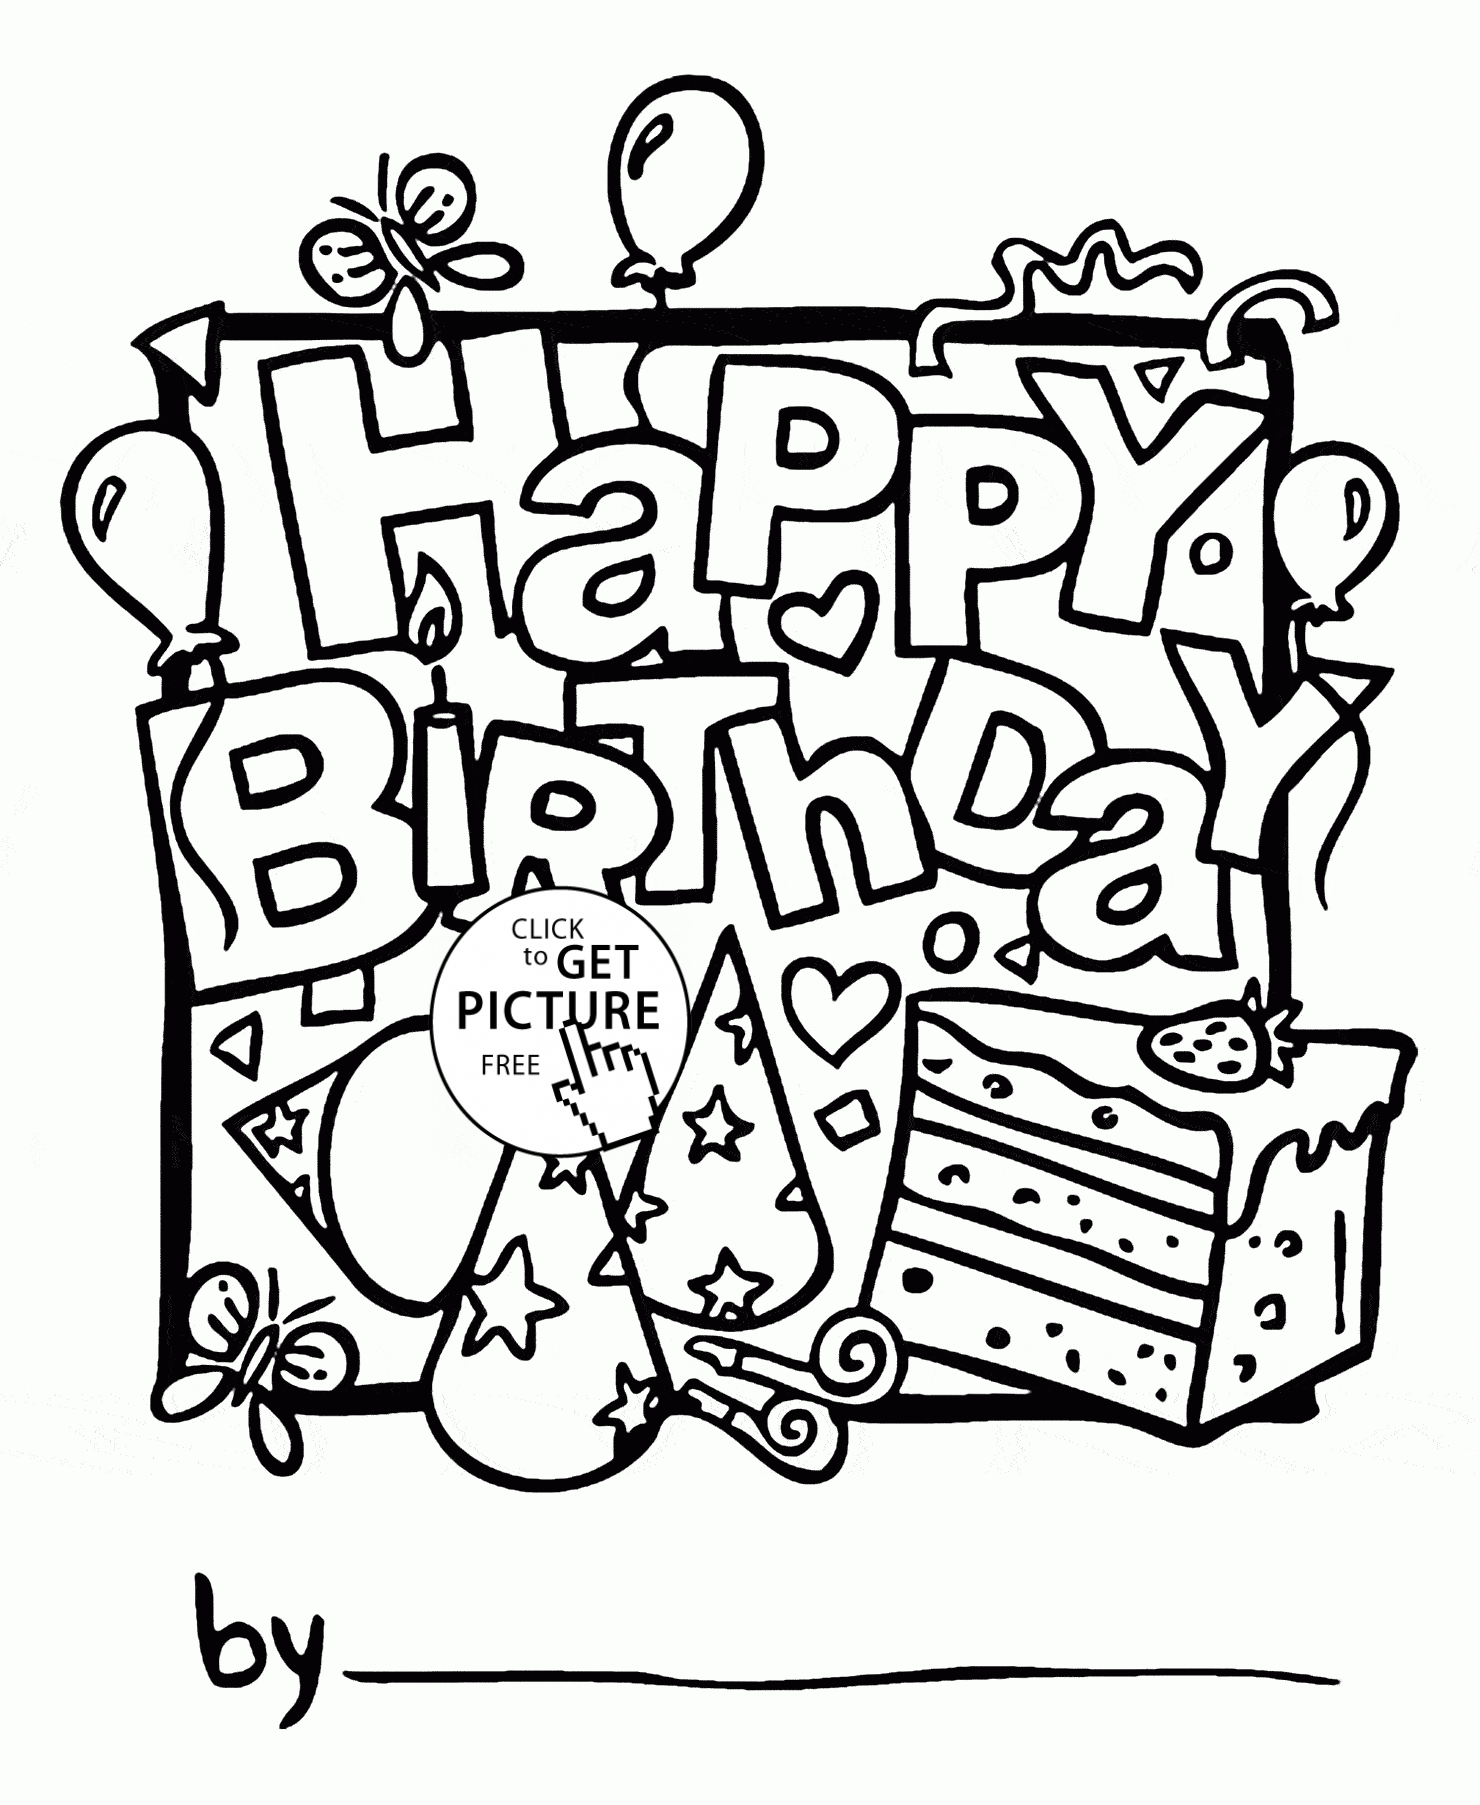 pin-on-birthday-wishes